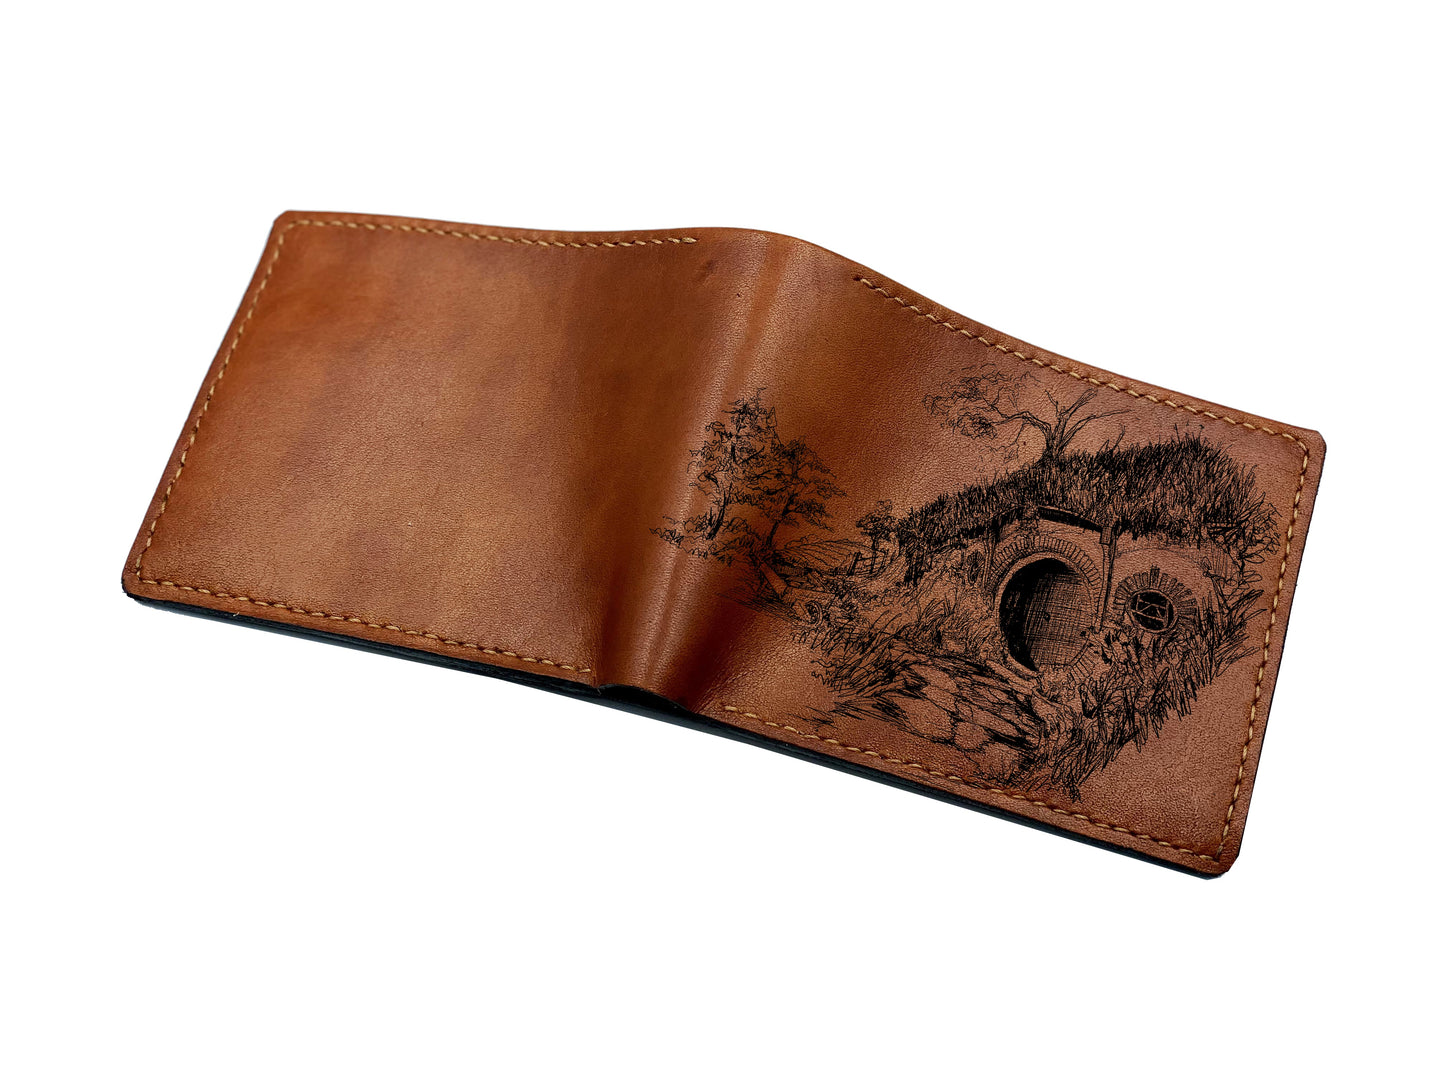 Mayan Corner - The Lord of the Rings leather handmade wallet, The hobbit house drawing wallet, the Shire countryside art wallet, leather gift for men